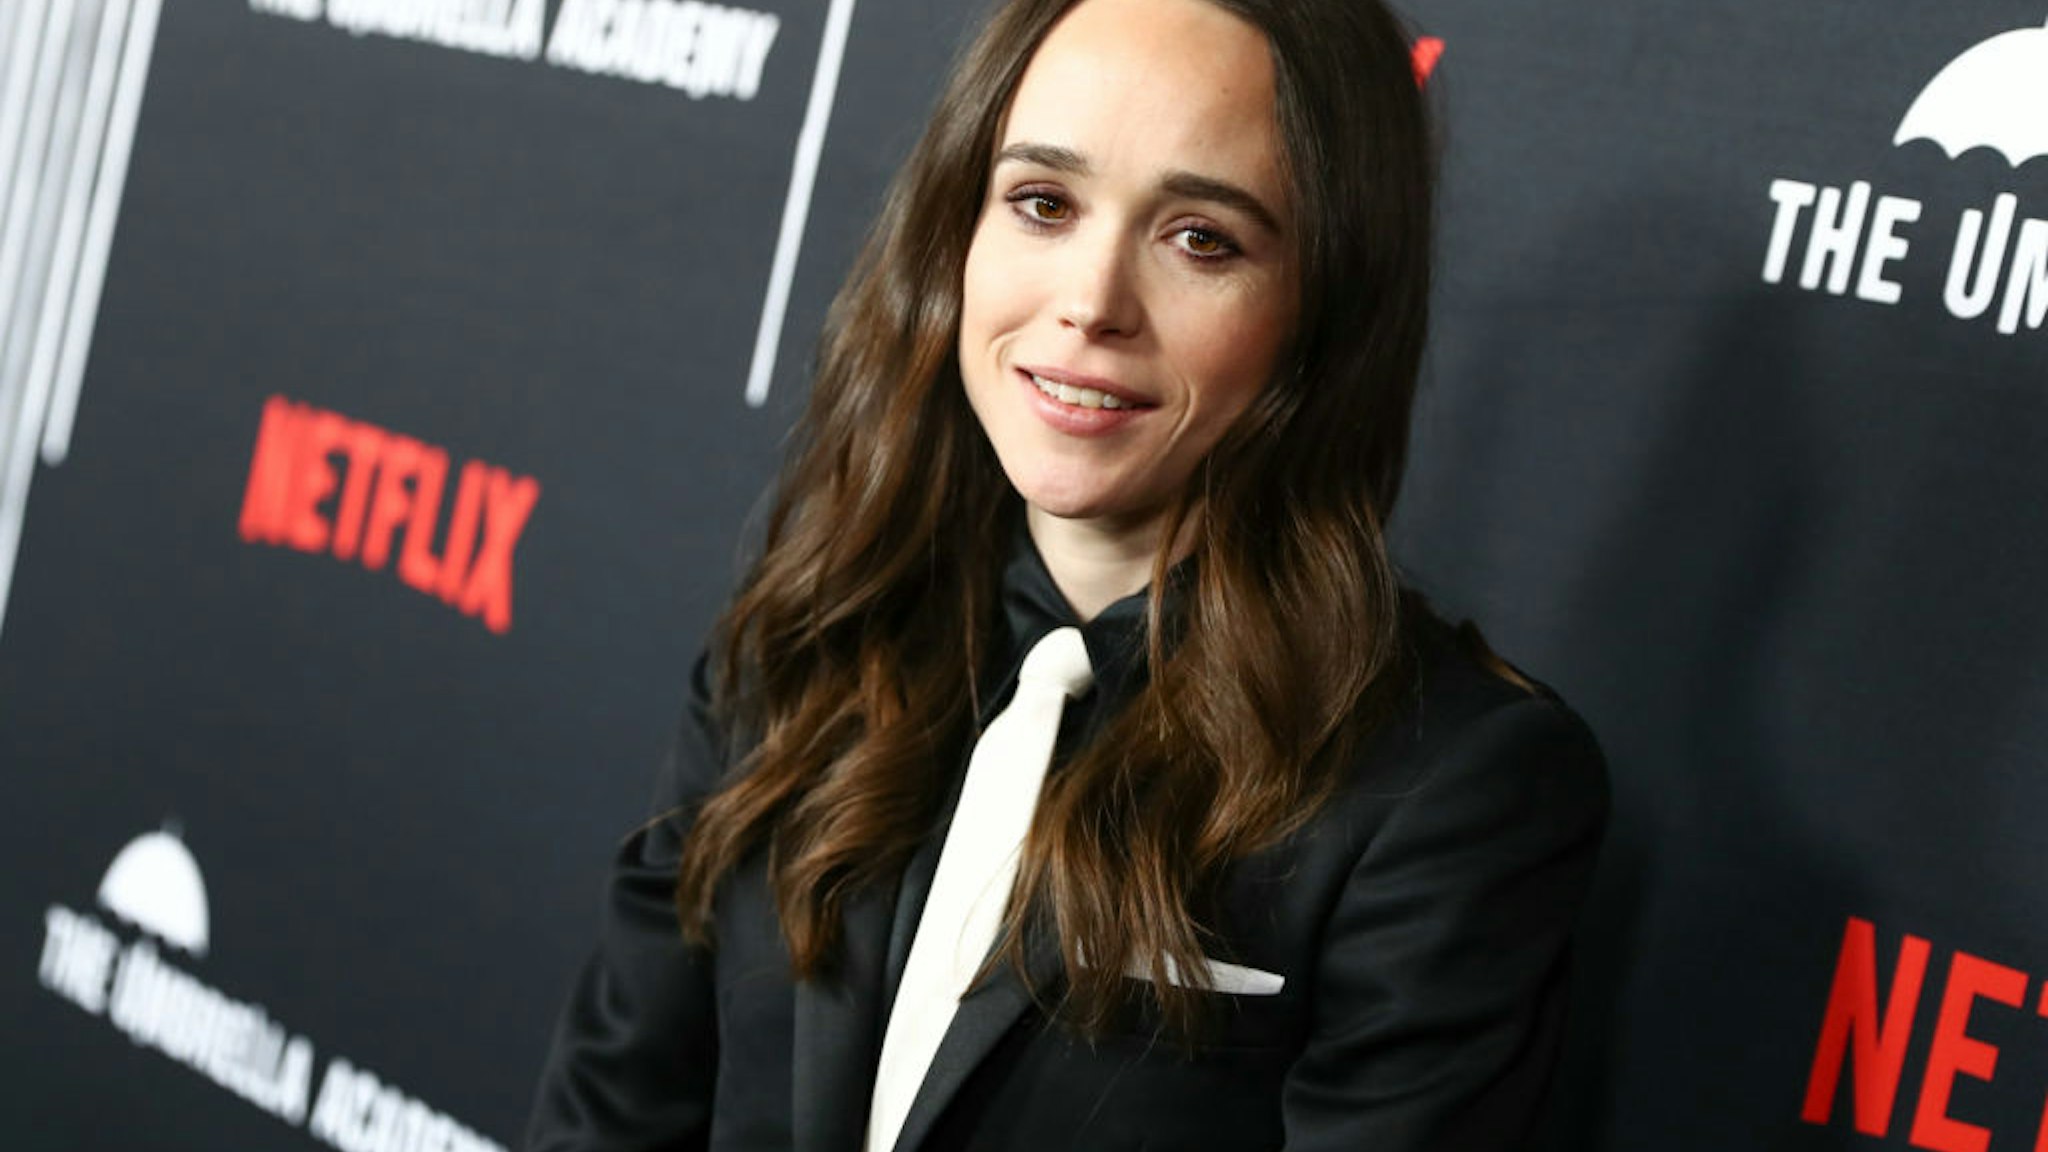 HOLLYWOOD, CALIFORNIA - FEBRUARY 12: Ellen Page attends the premiere of Netflix's "The Umbrella Academy" at ArcLight Hollywood on February 12, 2019 in Hollywood, California. (Photo by Rich Fury/Getty Images)